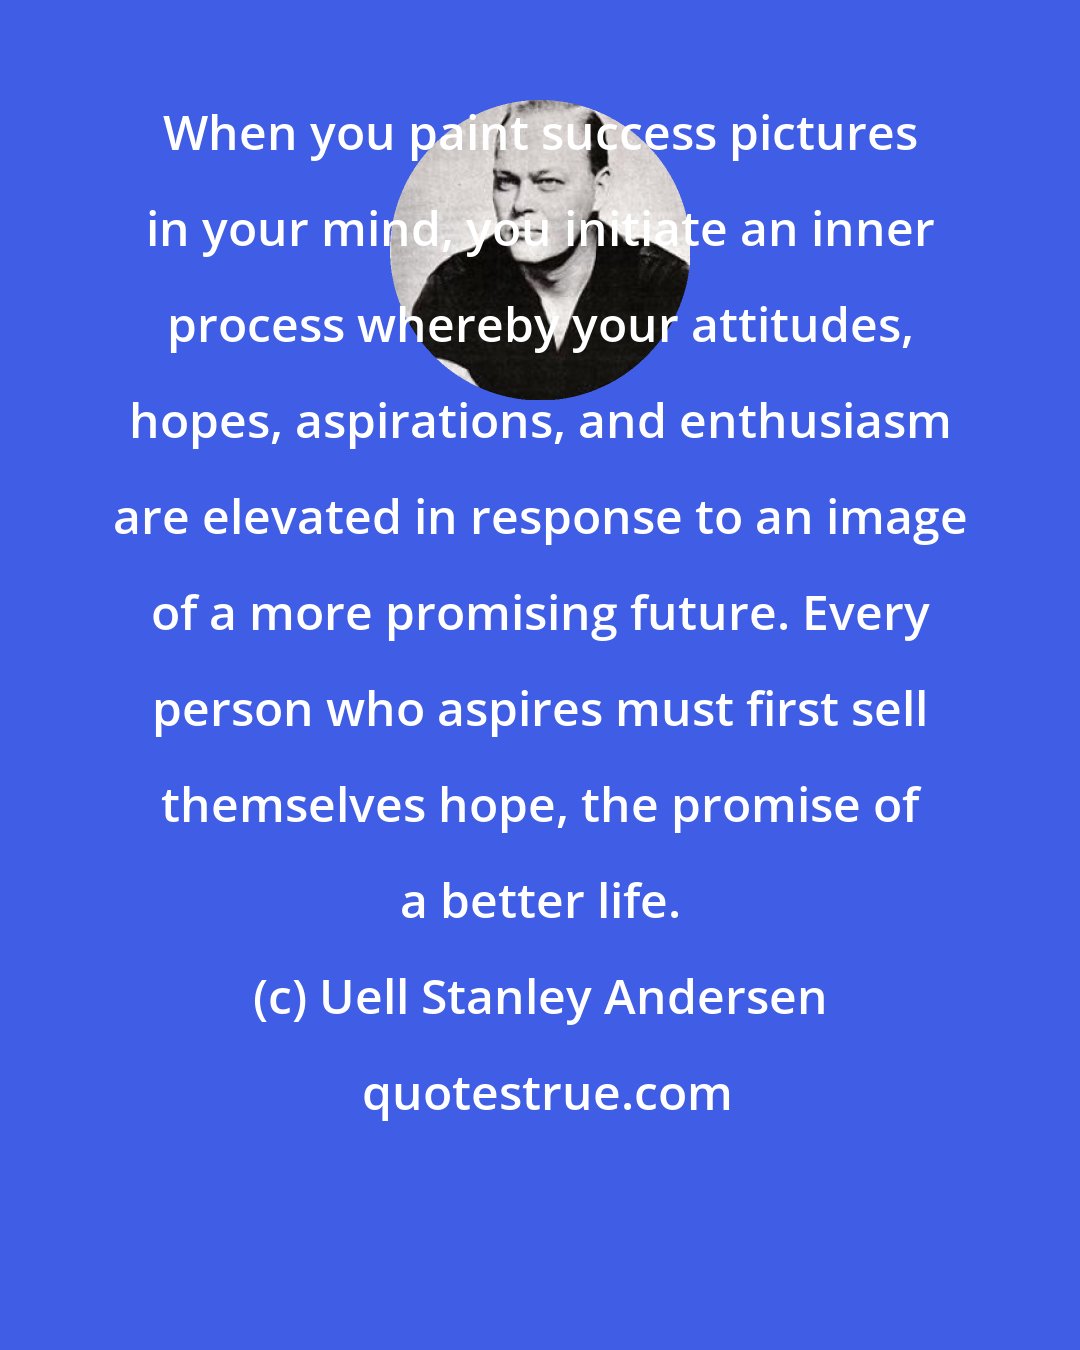 Uell Stanley Andersen: When you paint success pictures in your mind, you initiate an inner process whereby your attitudes, hopes, aspirations, and enthusiasm are elevated in response to an image of a more promising future. Every person who aspires must first sell themselves hope, the promise of a better life.